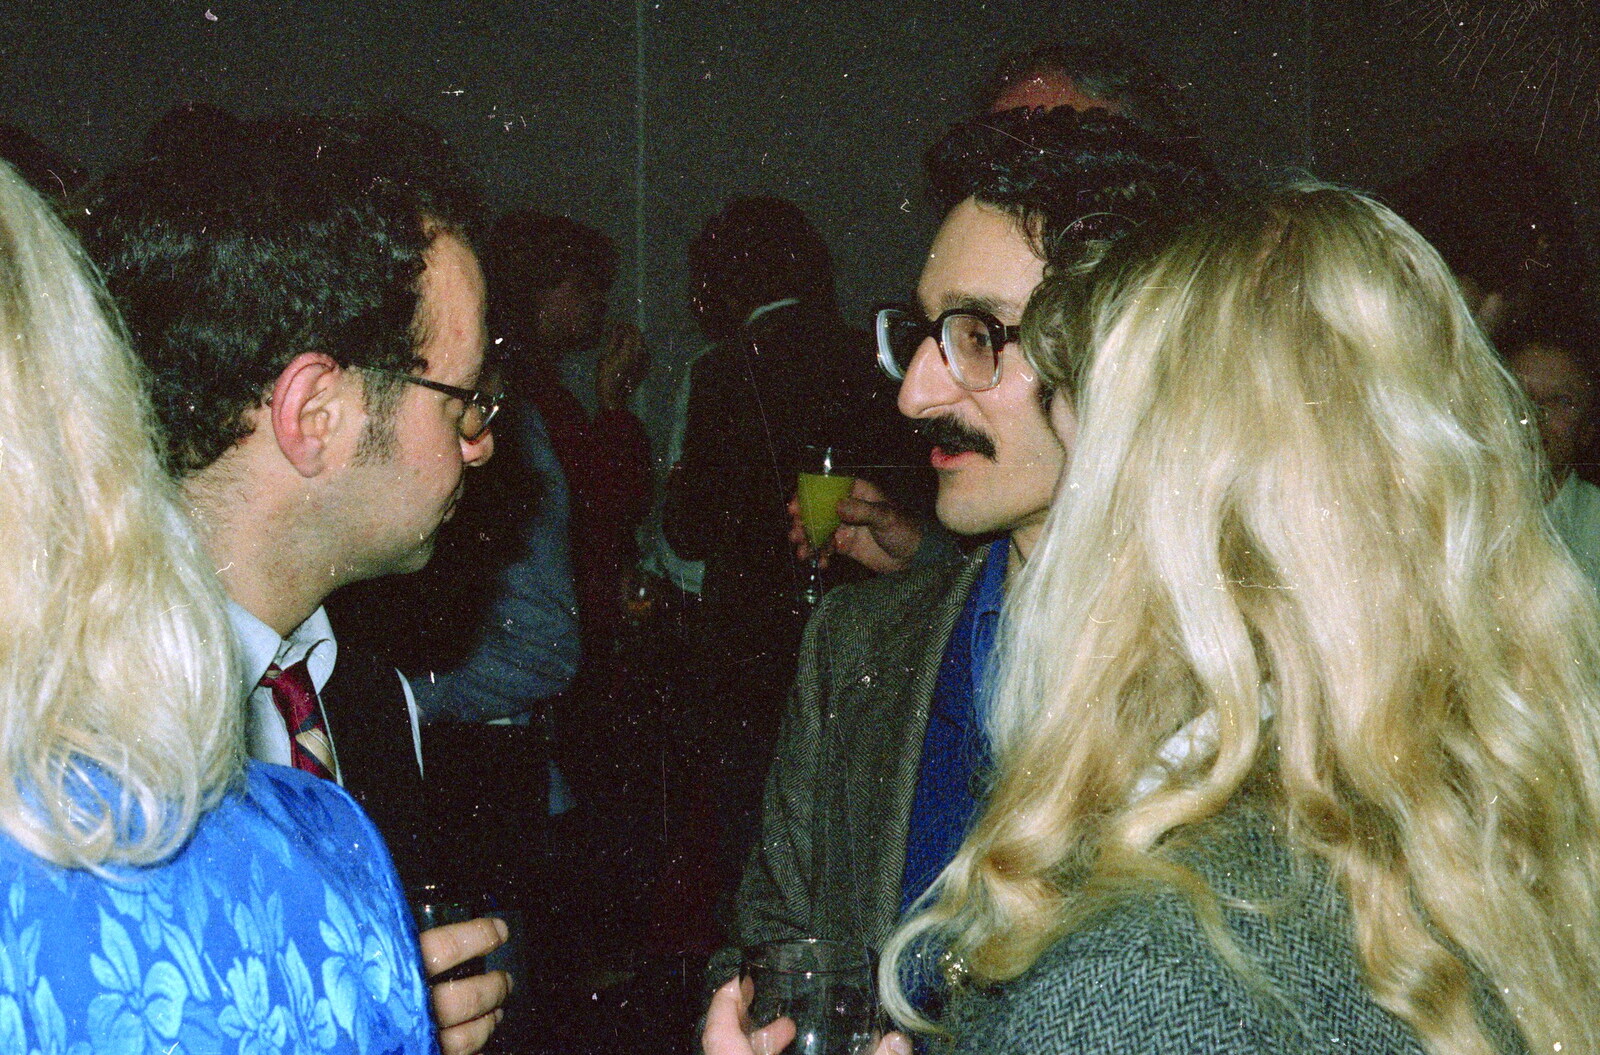 Mr. Smidman and Mr. C-P chat from Brockenhurst College Presentation and Christmas, Hampshire - 19th December 1985